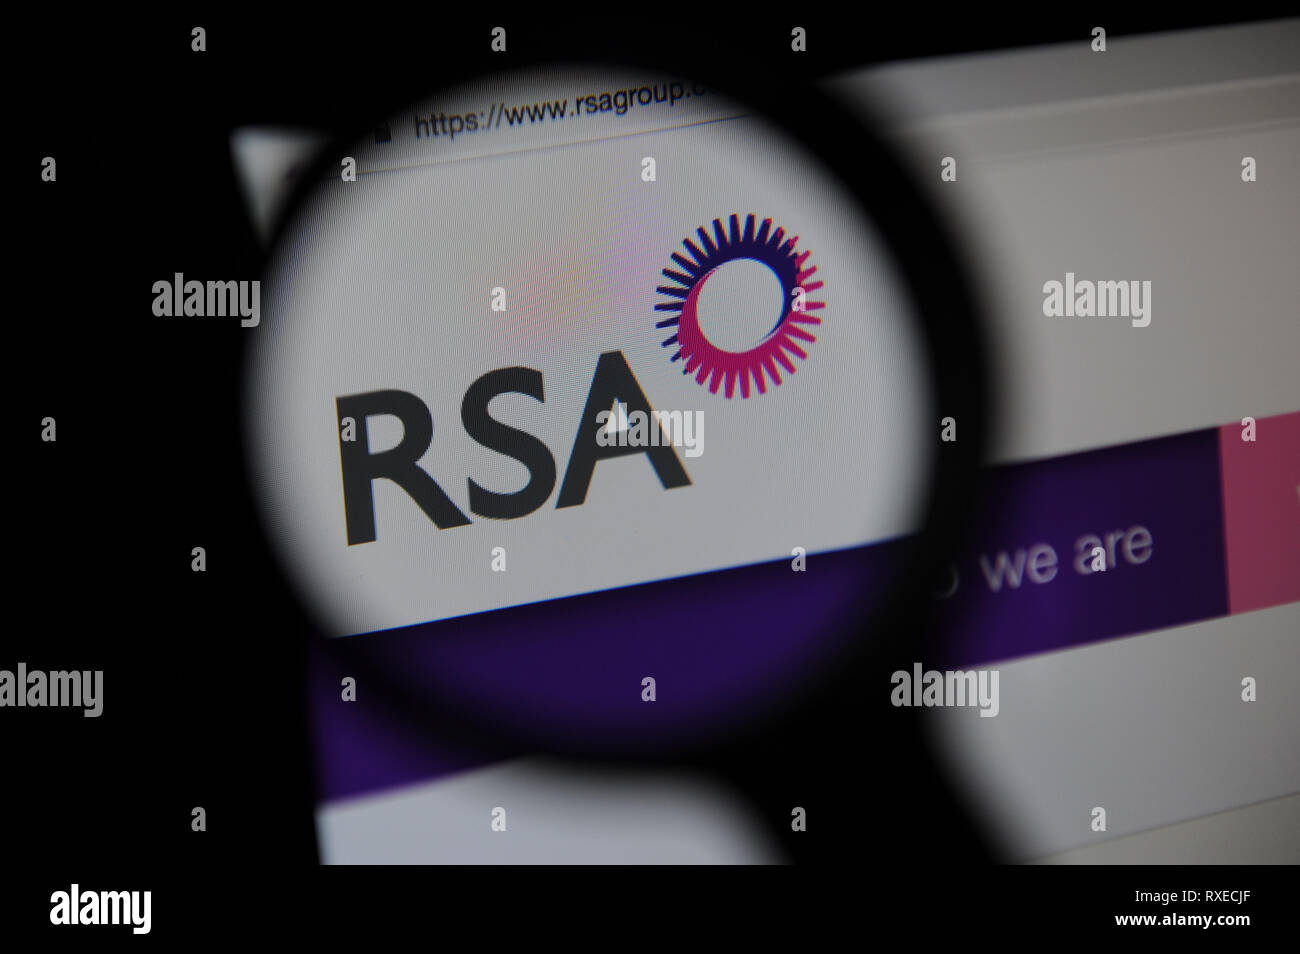 The RSA website seen through a magnifying glass Stock Photo